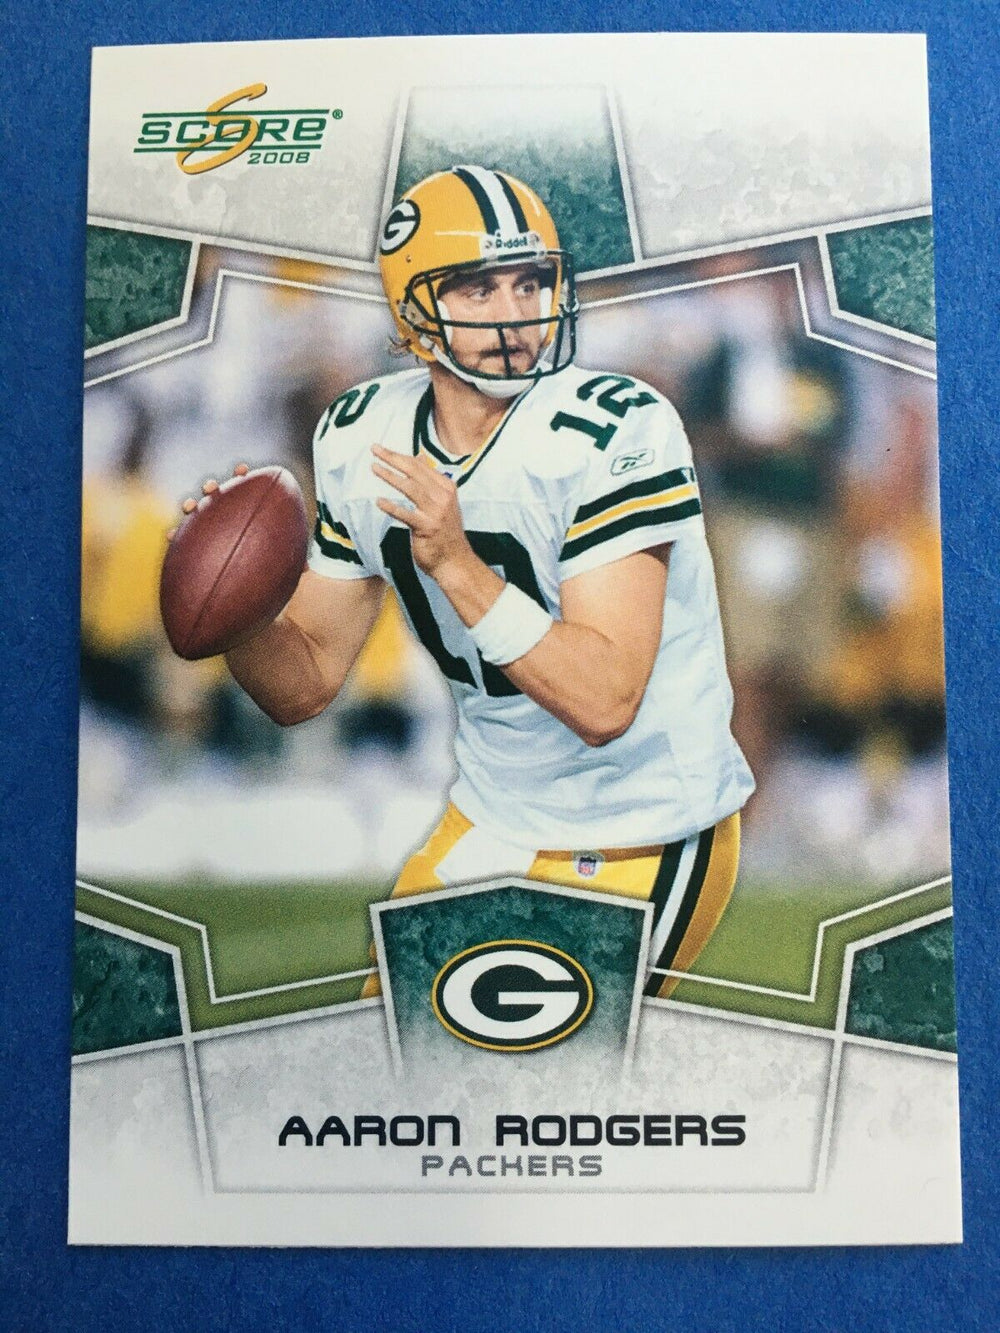 Aaron Rodgers 2008 Score Series Mint Card #105